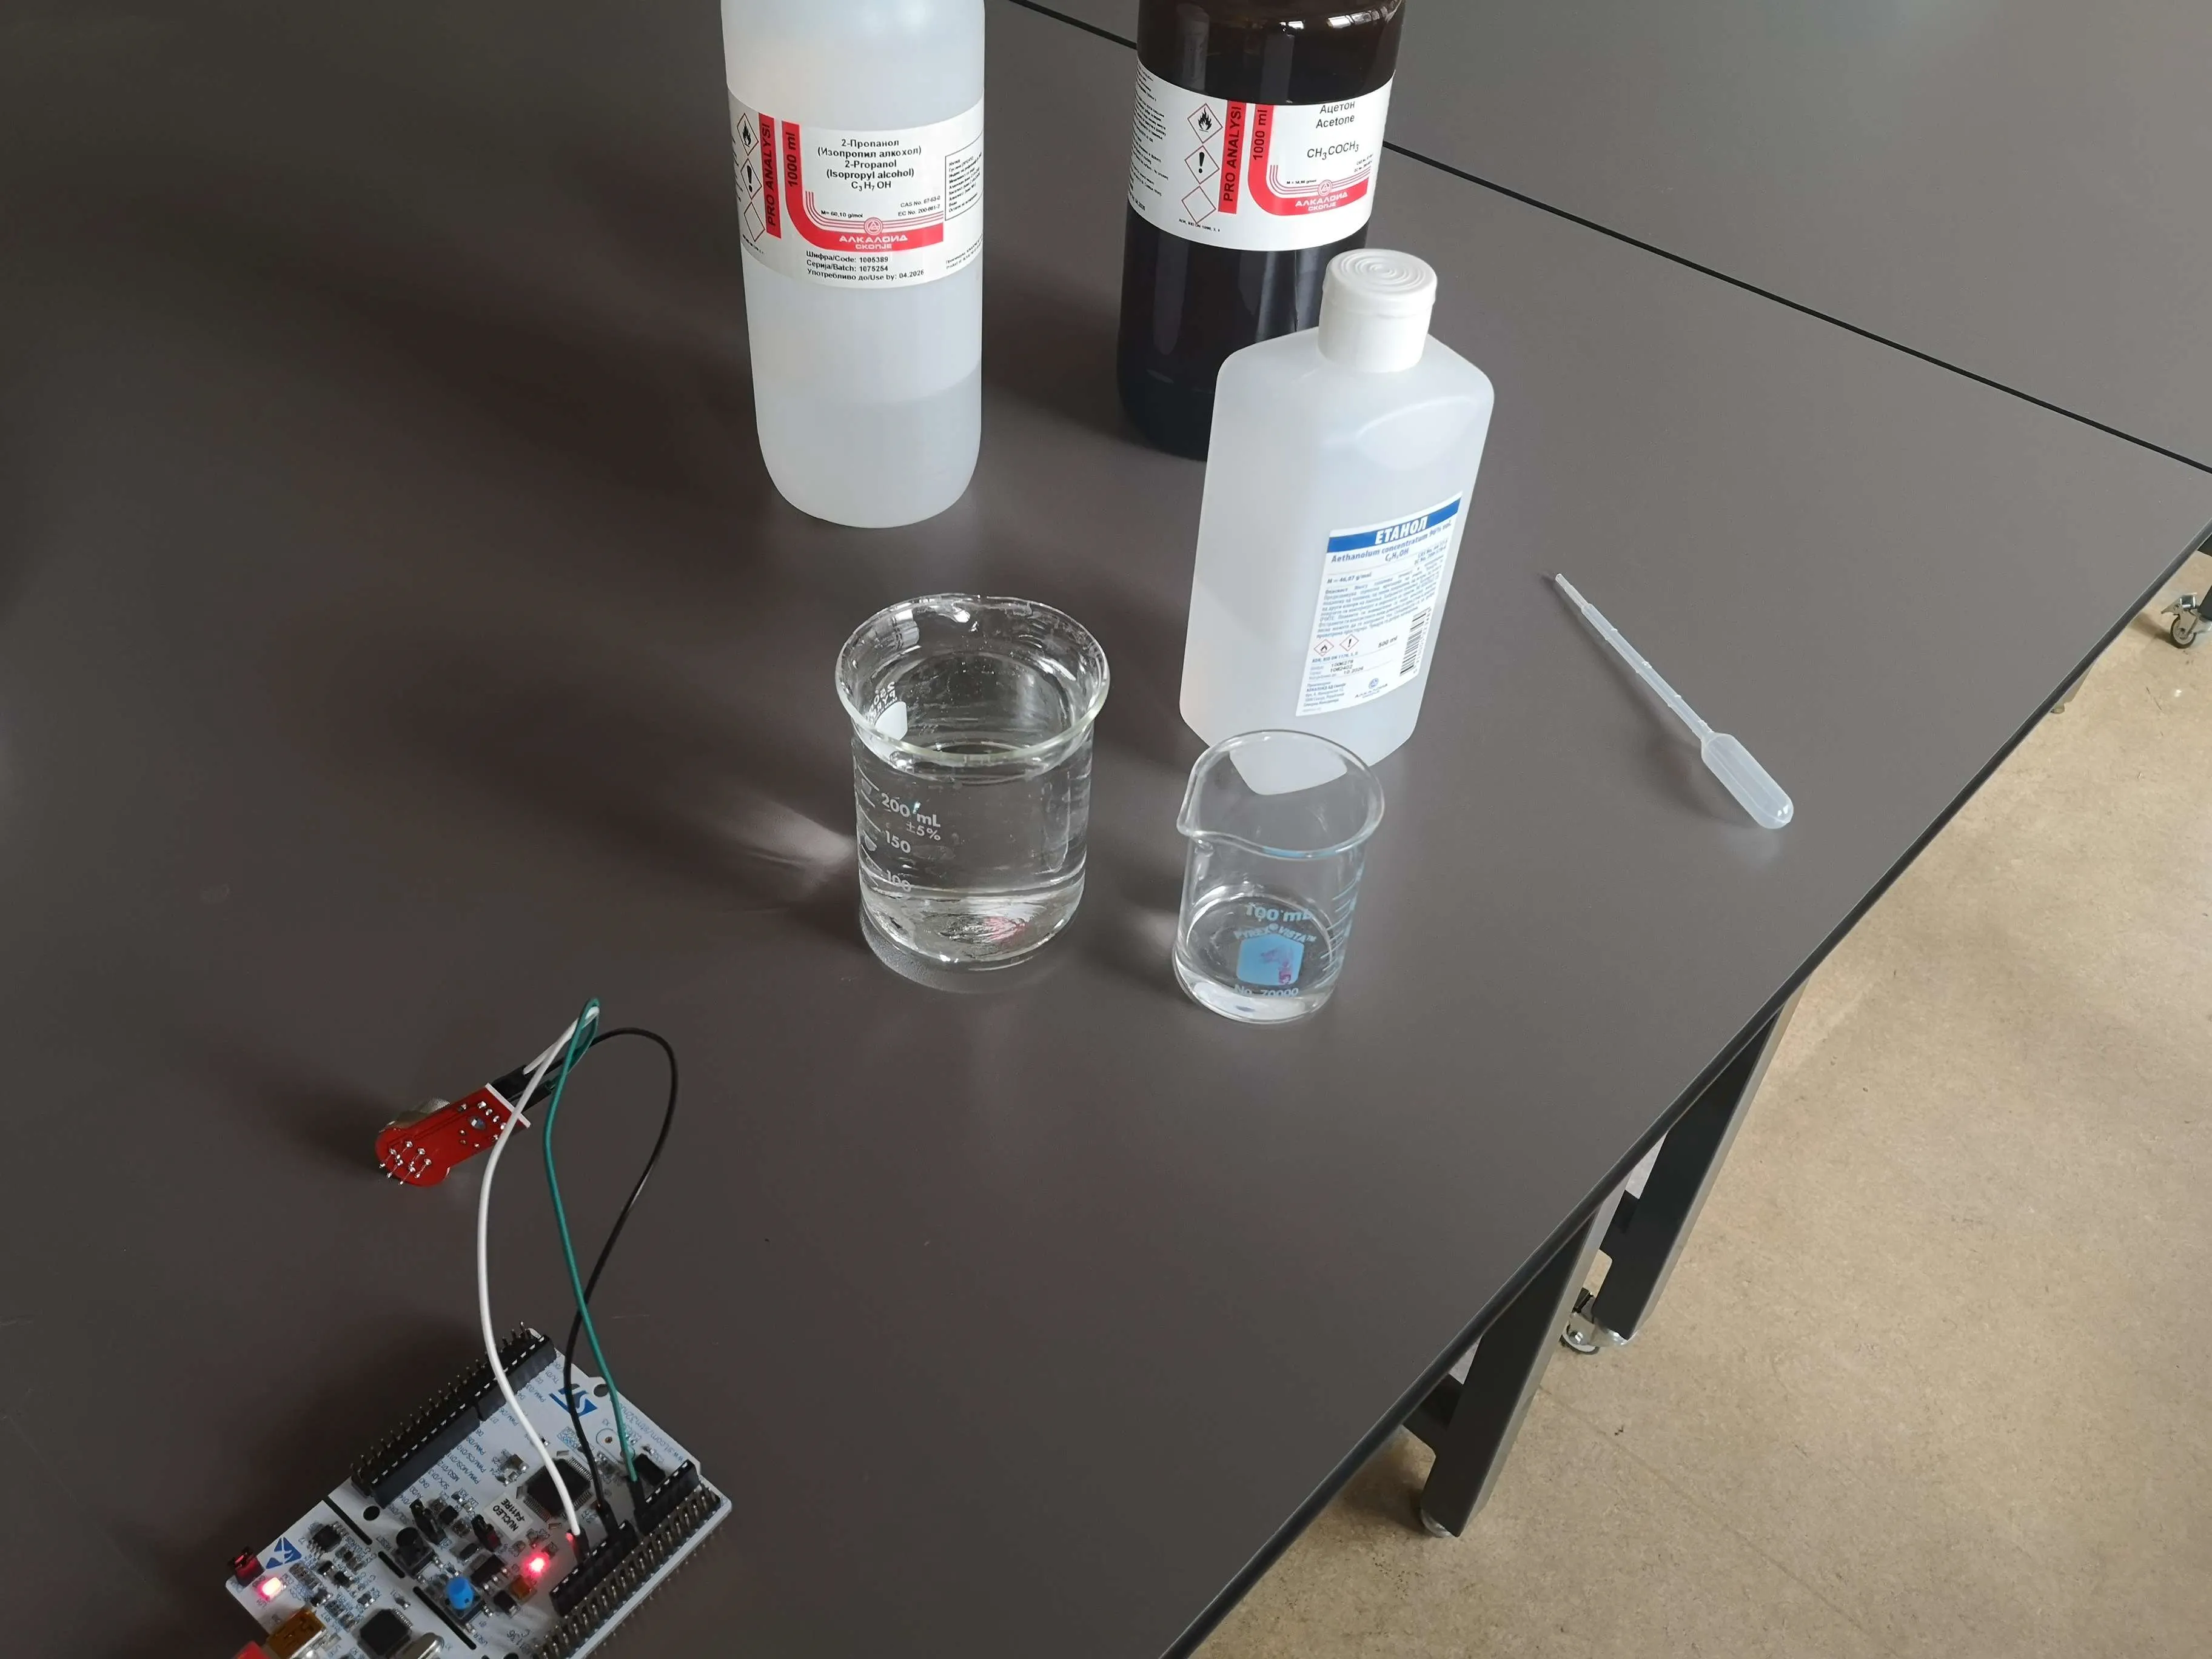 Picture of the chemicals used and how the sensor was connected